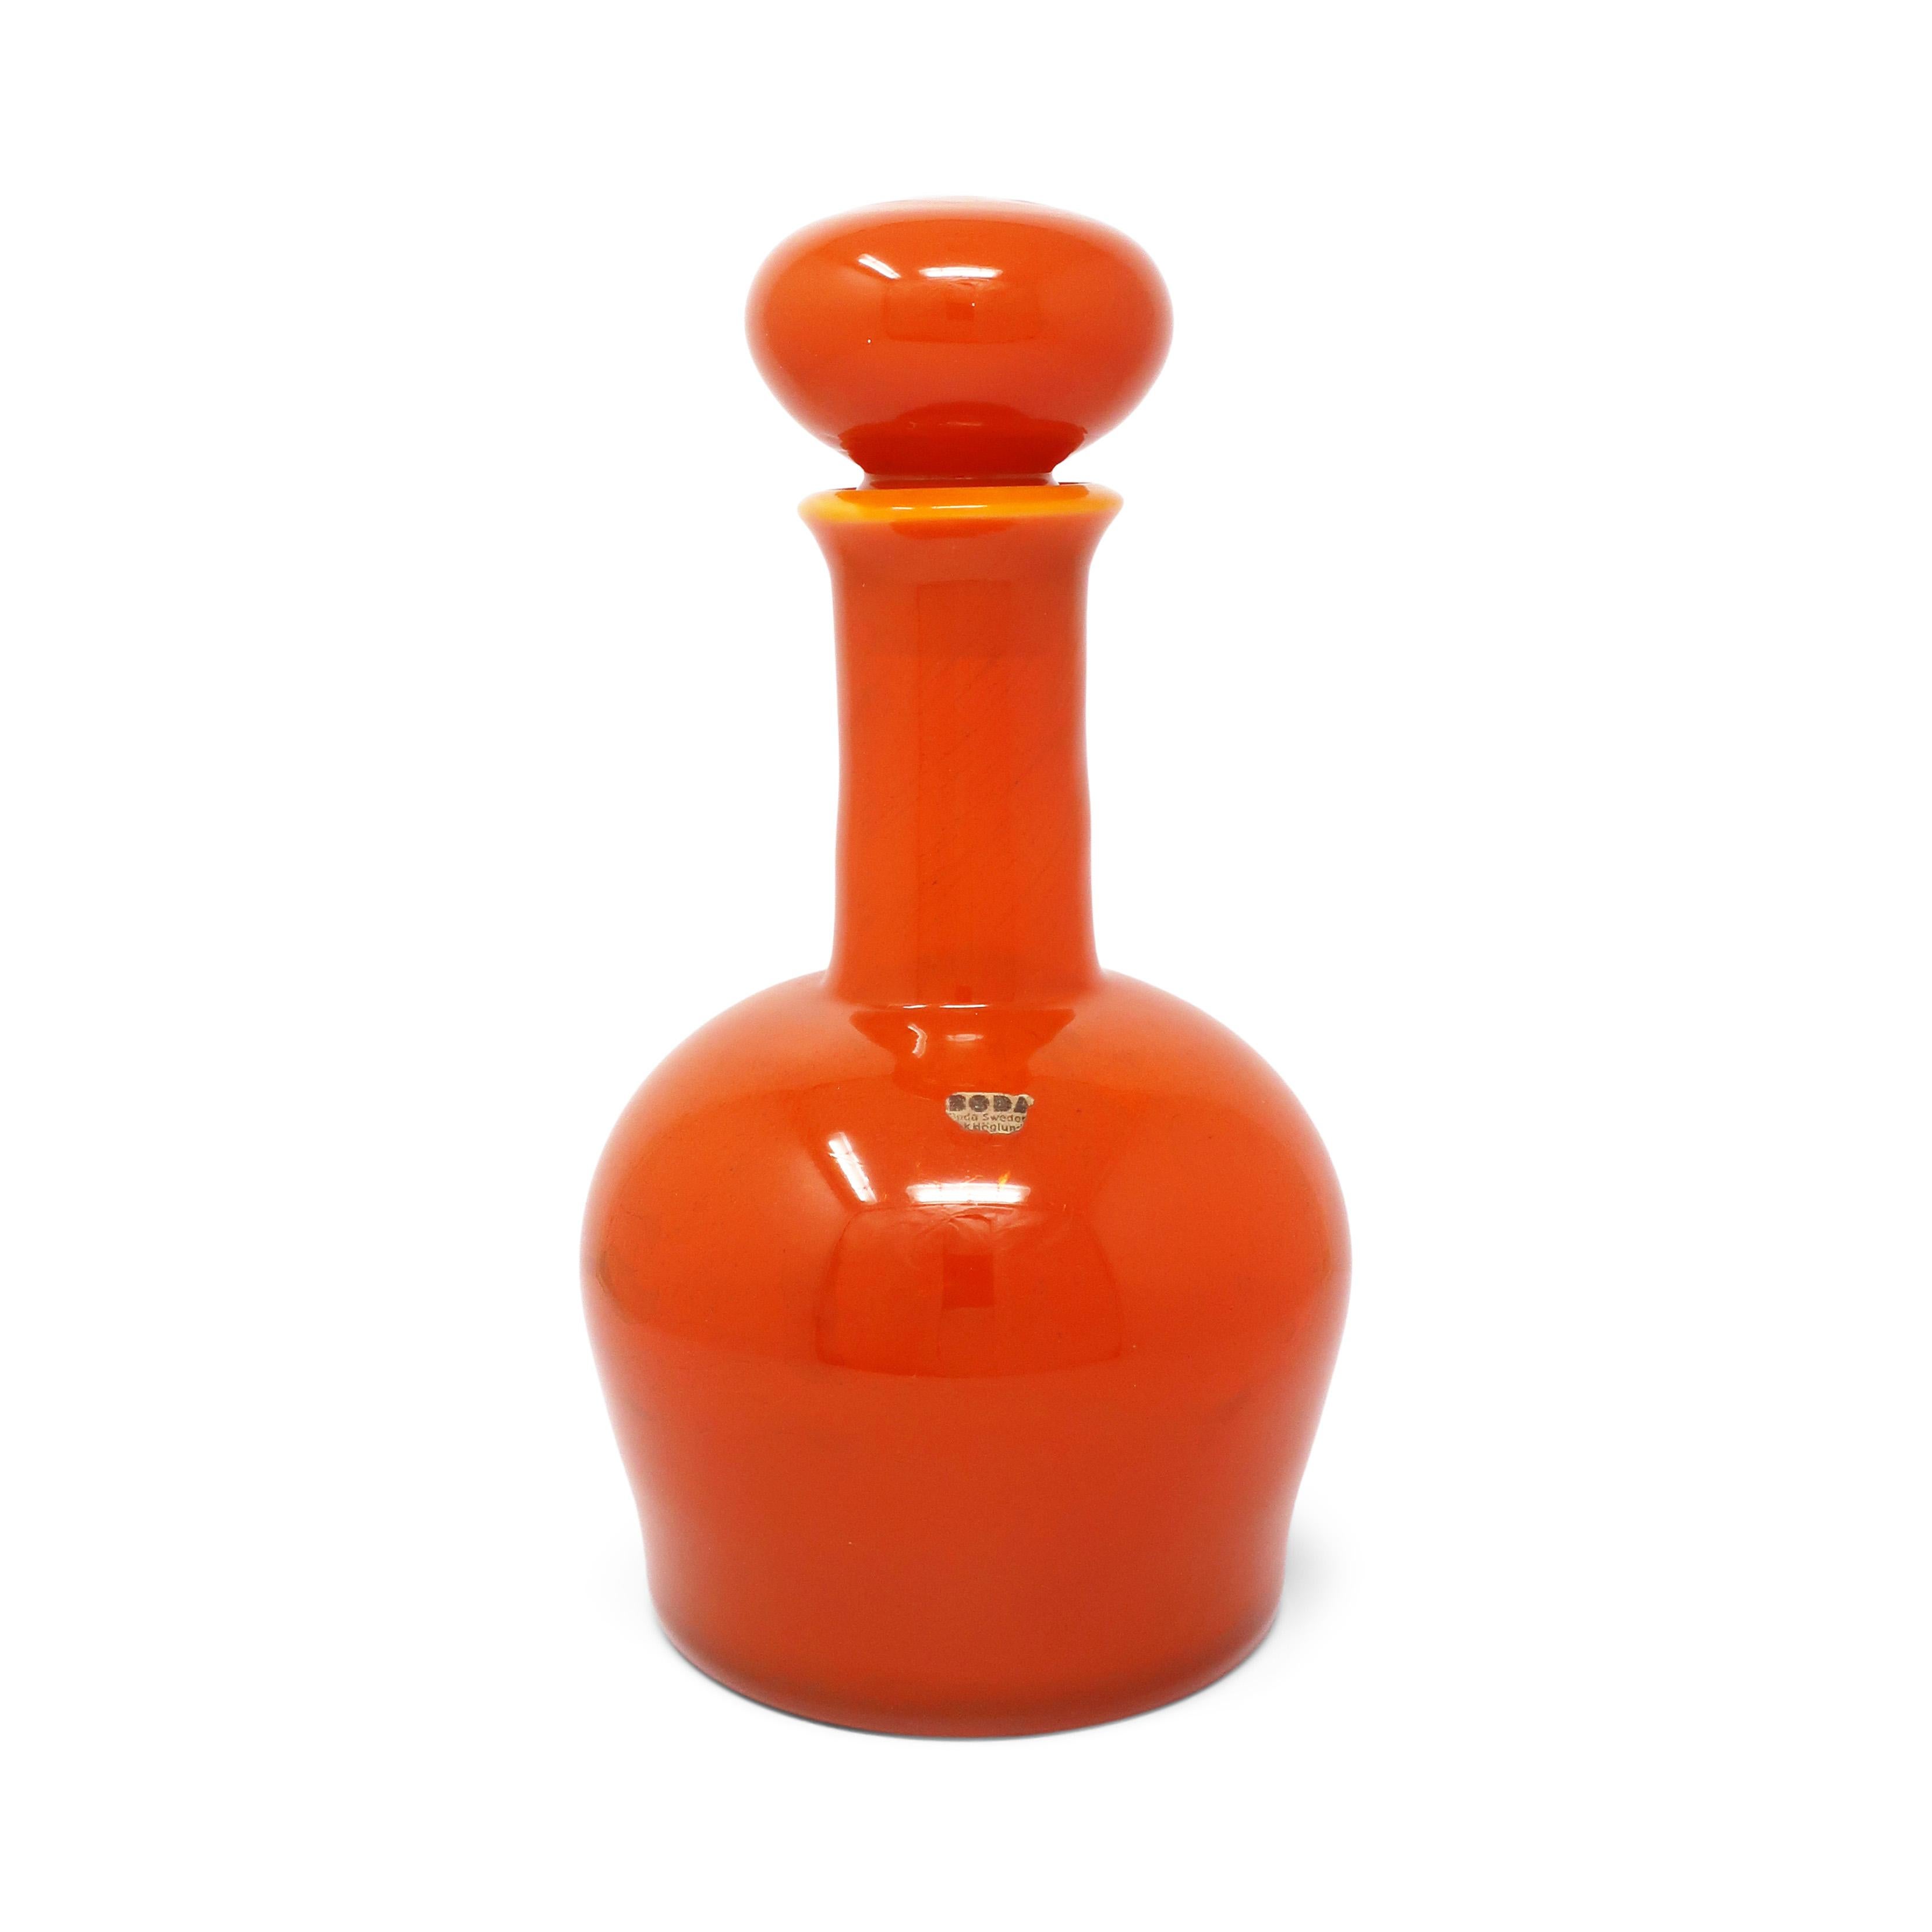 A beautiful Swedish modern orange art glass decanter with stopper by Erik Hoglund for Boda (now known as Kosta Boda).  A classic form designed by a master of the art glass craft and a pioneer of mid-century modern and Scandinavian modern design. 